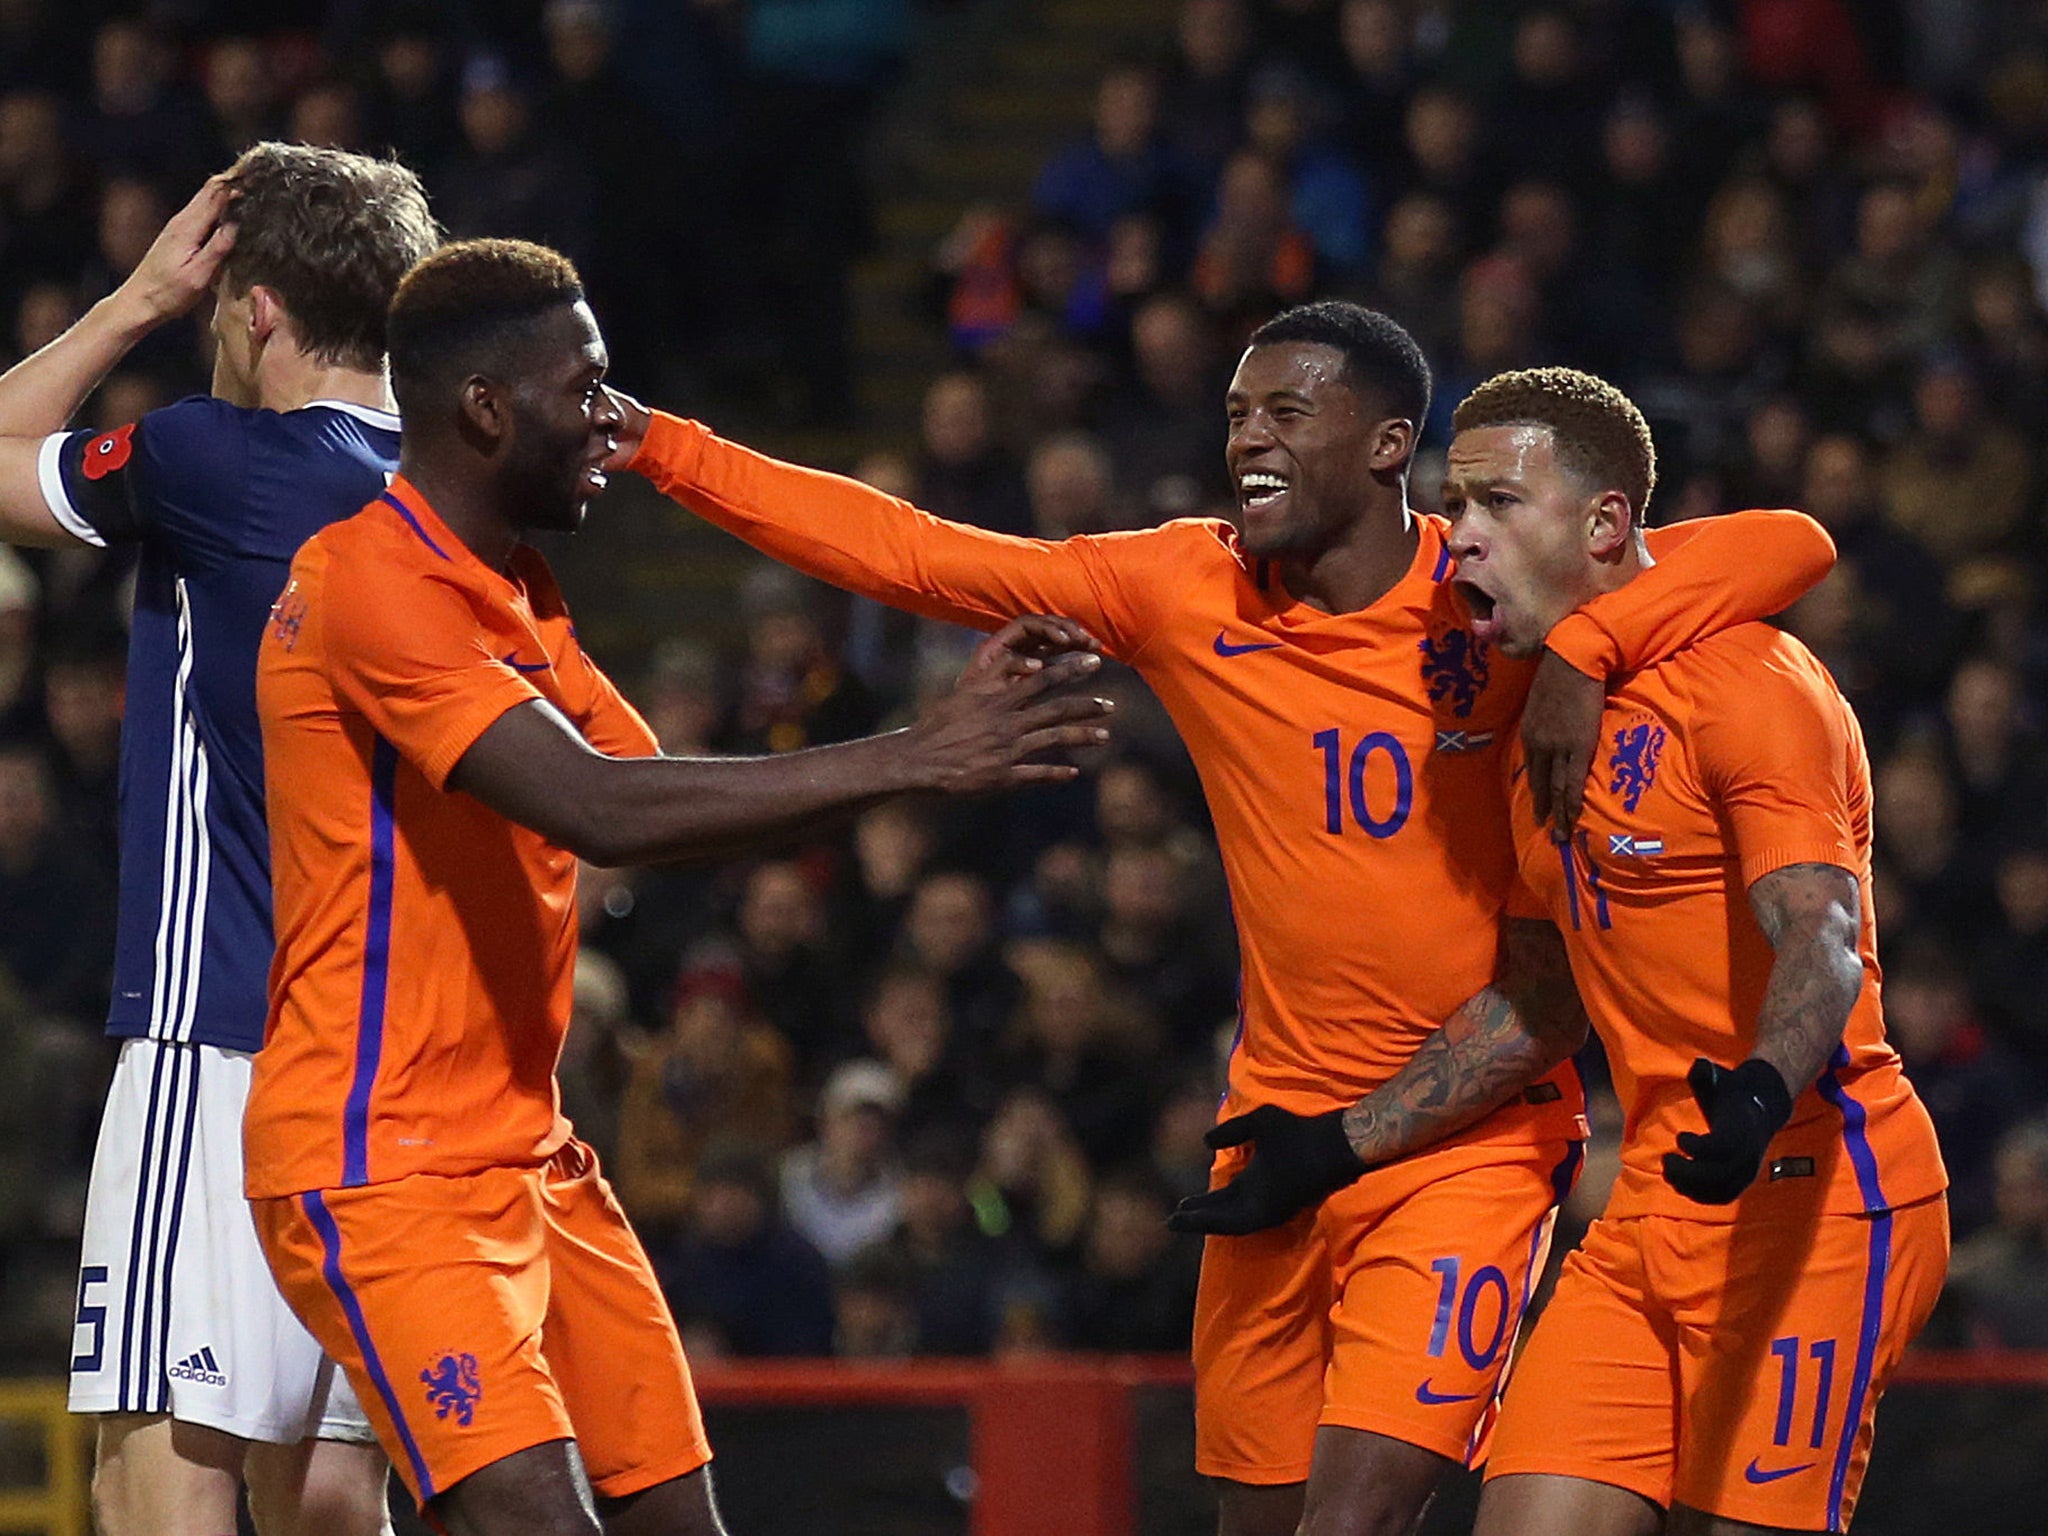 Memphis Depay scored the game's only goal in the first half